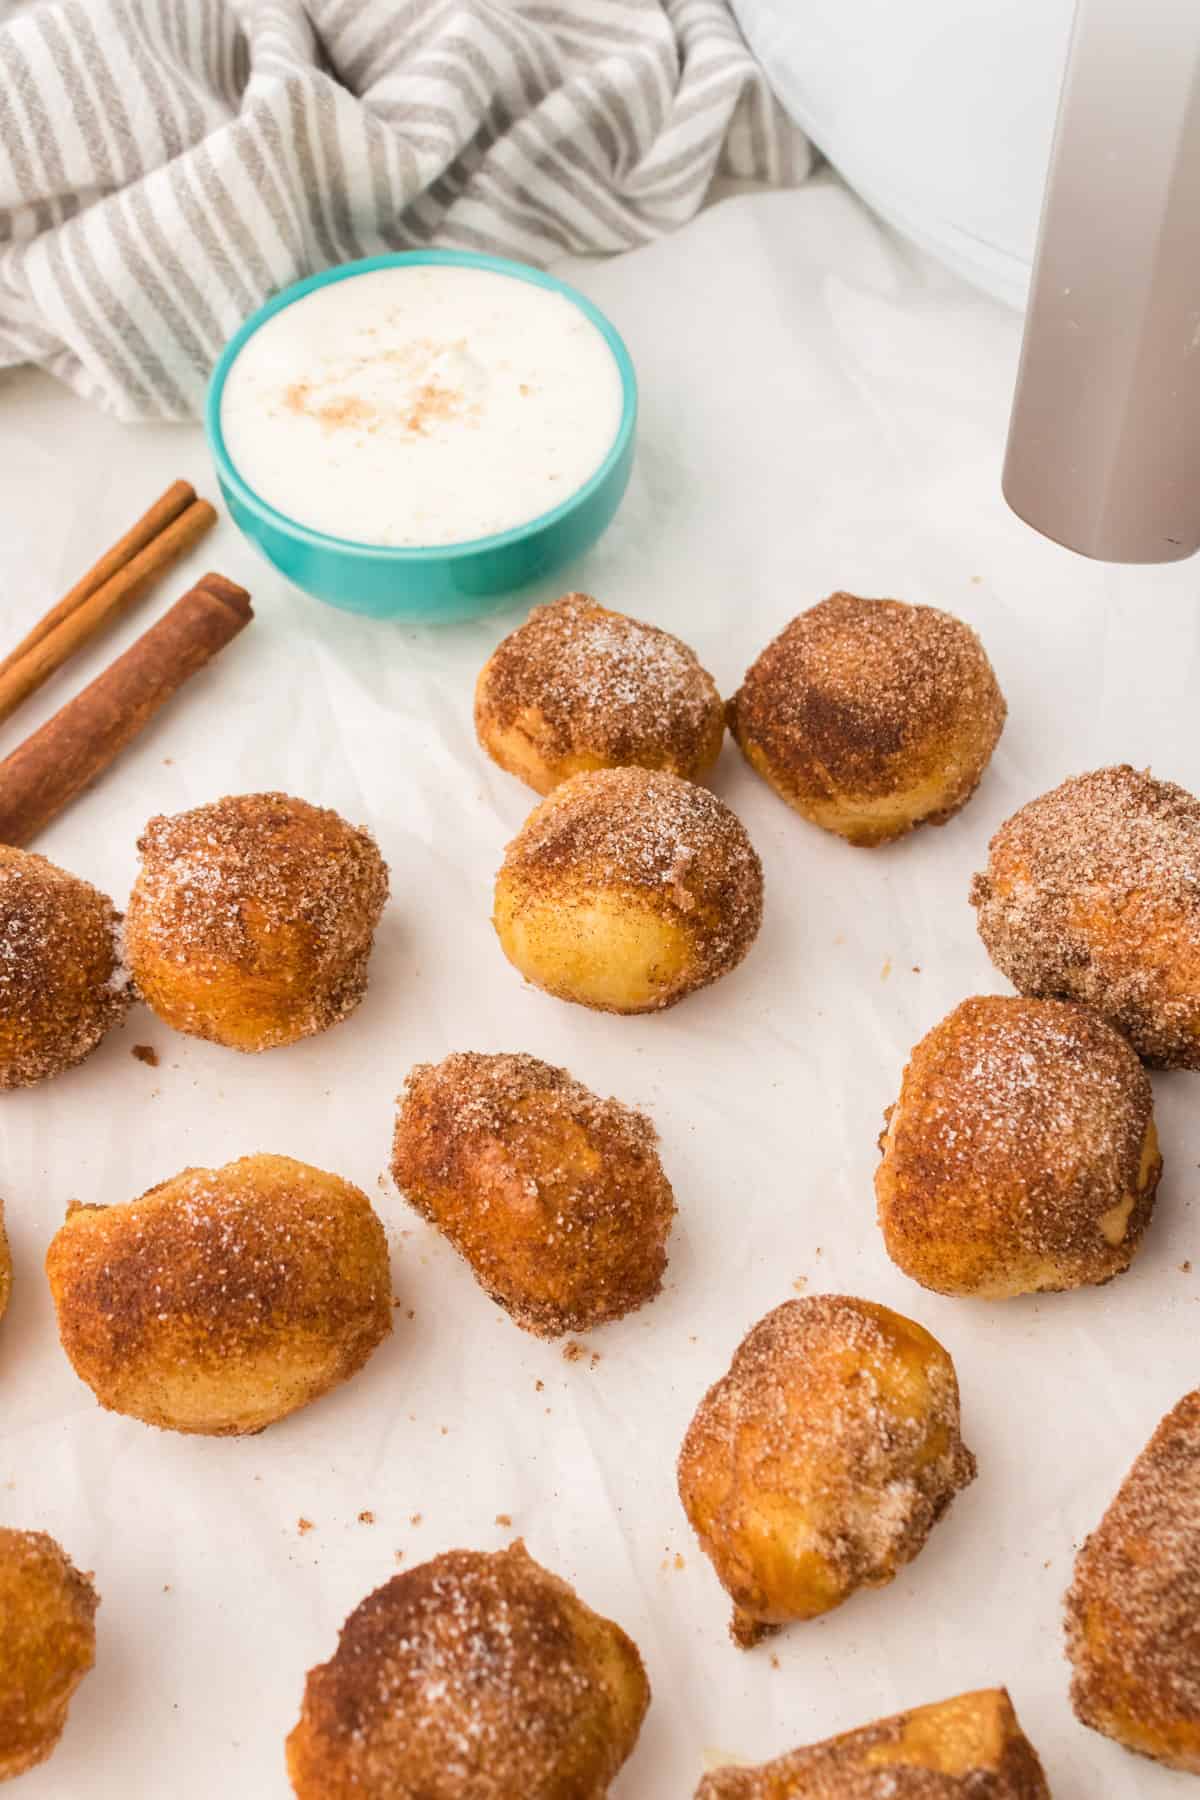 Cinnamon sugar covered pretzel bites on sheet of parchment paper with dipping sauce in the background.